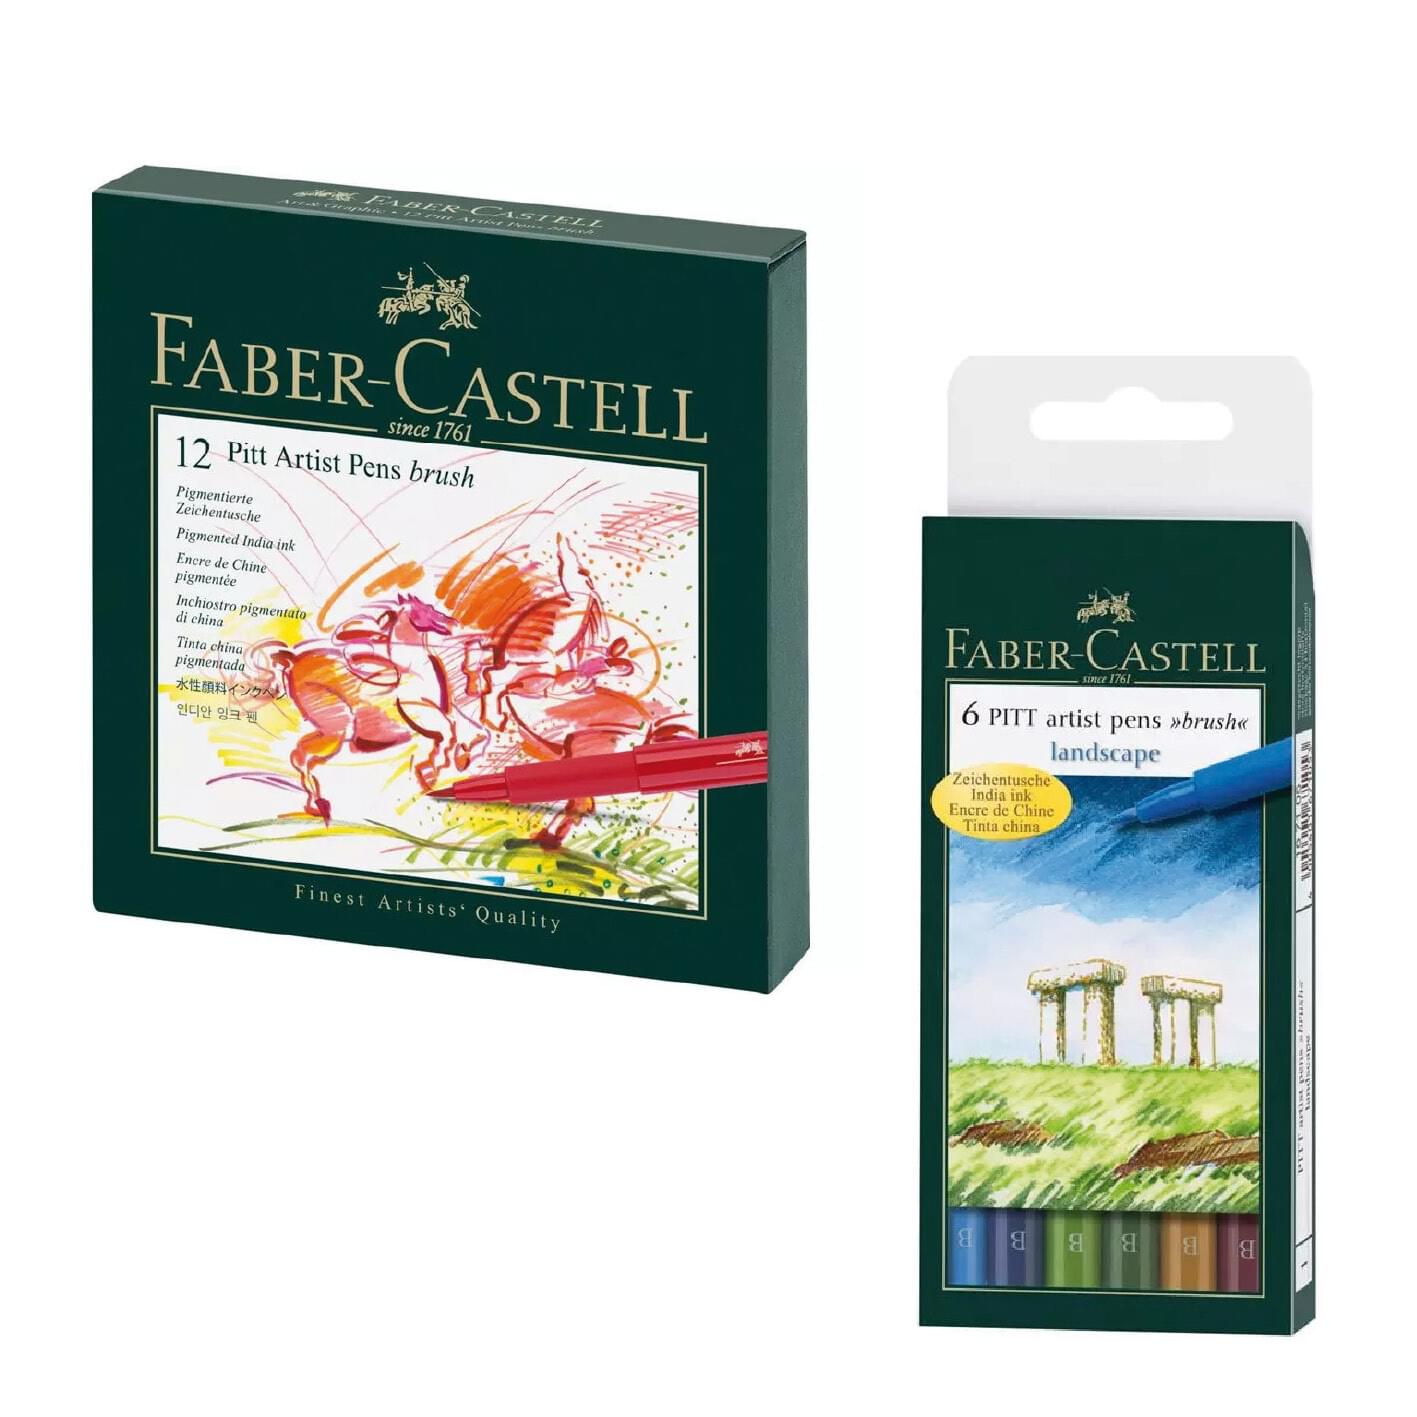 Faber-Castell Metallic Markers - Set of 12, 1.5 mm